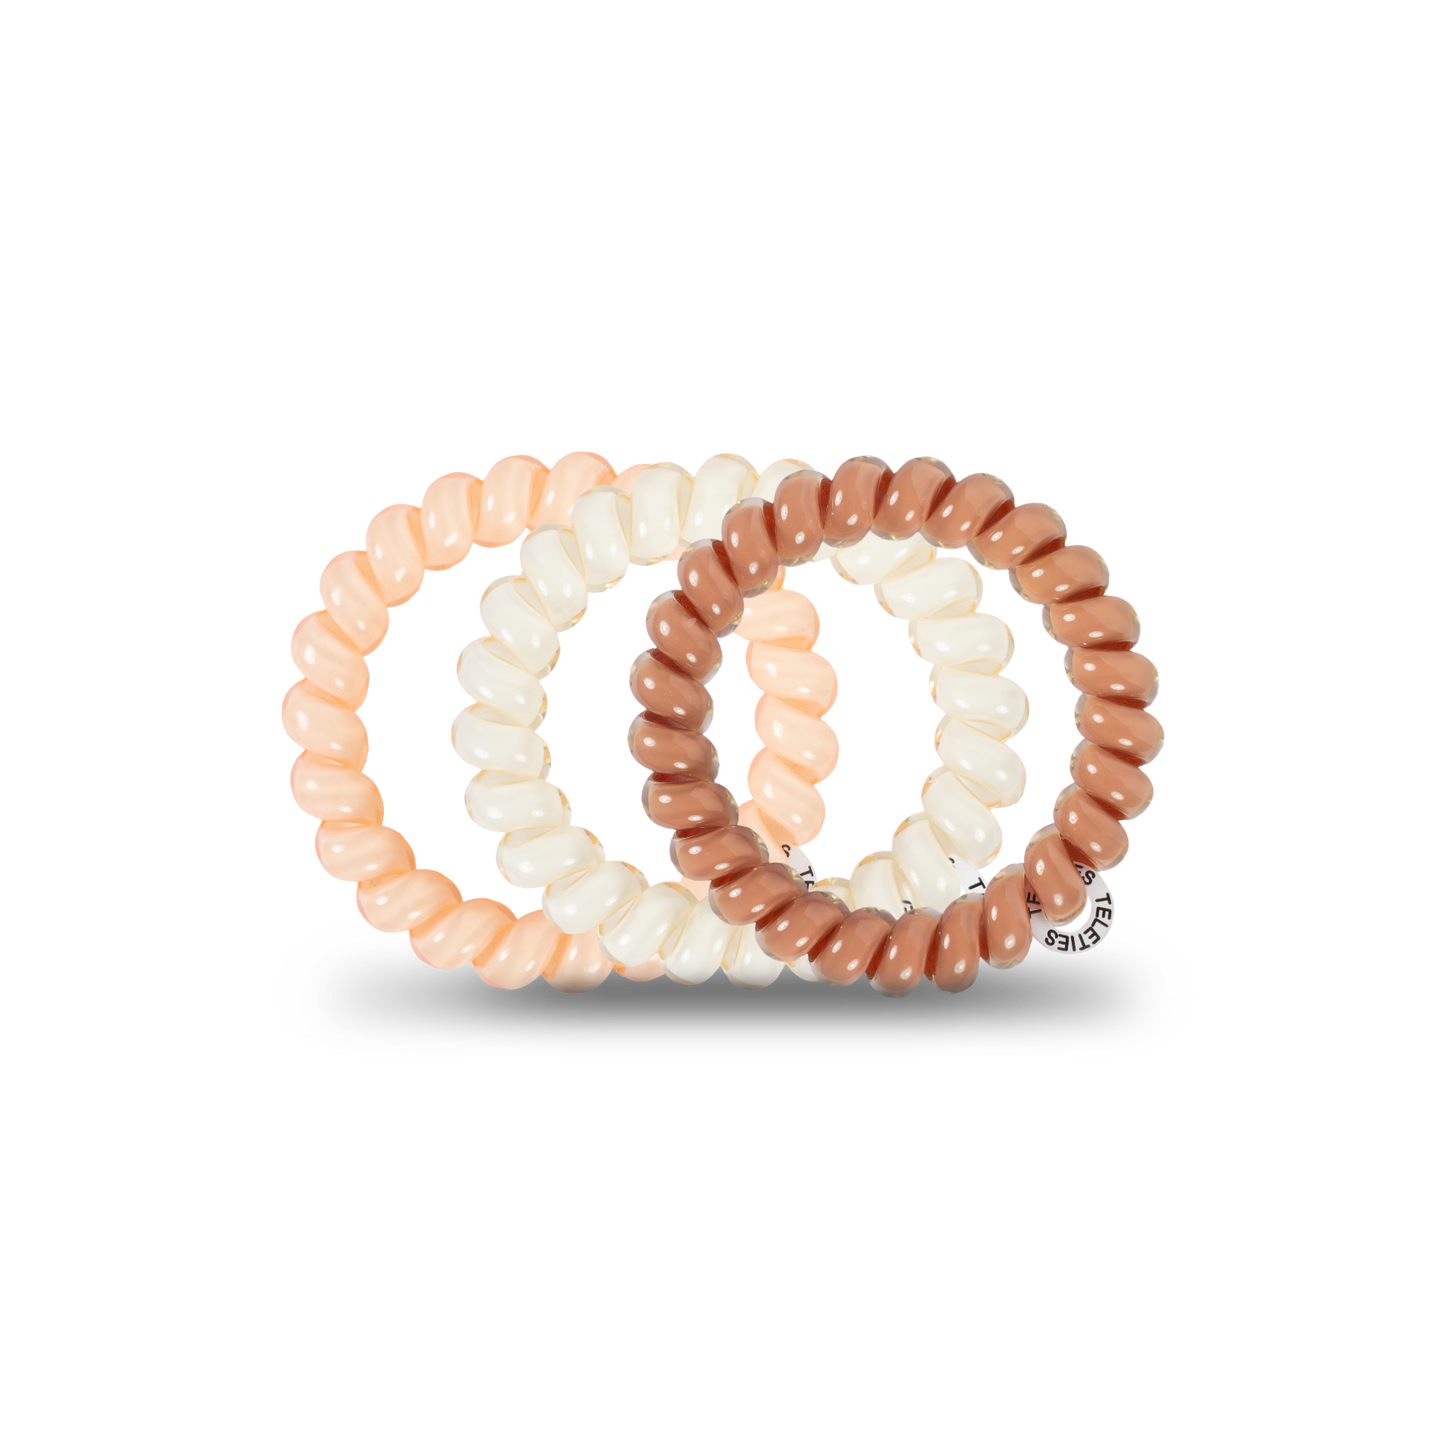 Teleties For the Love of Nudes - Large Spiral Hair Coils, Hair Ties